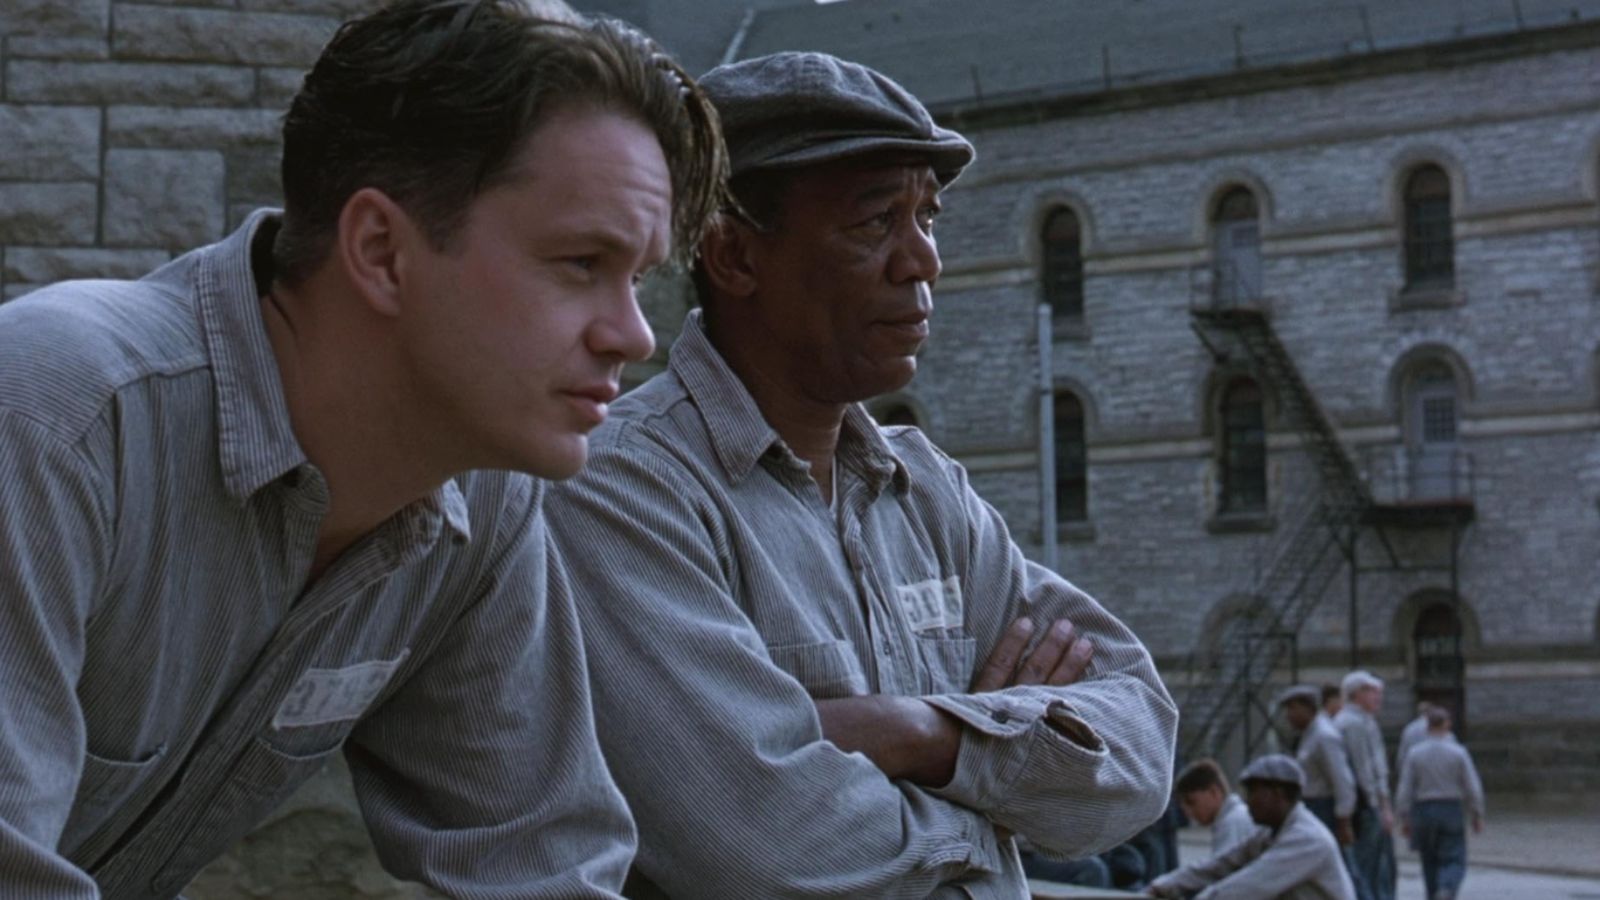 <p><span> Stephen King’s poignant tale of hope and redemption inside the grim walls of Shawshank Prison translated into a cinematic masterpiece. With Tim Robbins as the resilient Andy Dufresne and Morgan Freeman narrating the tale as Red, the movie goes deep into themes of friendship, perseverance, and finding freedom even in captivity.</span></p>